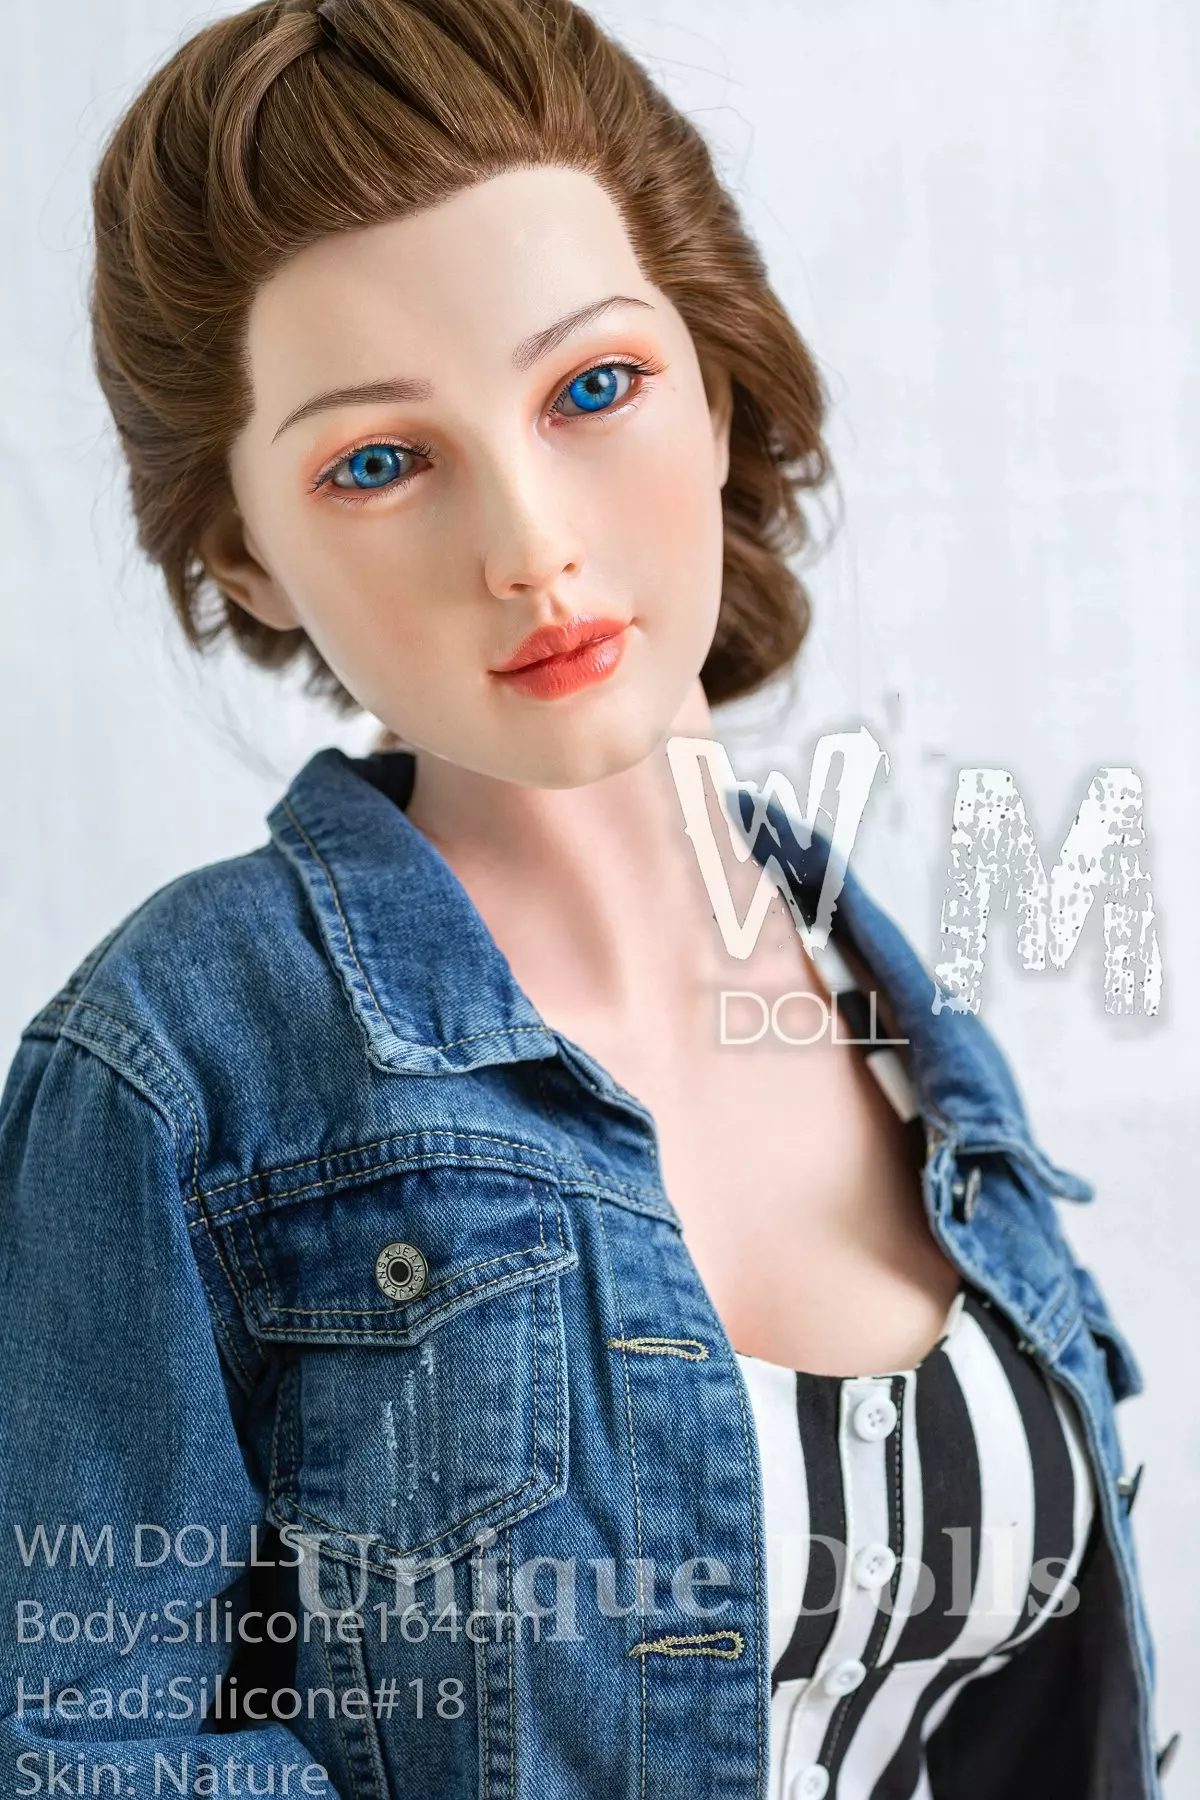 Angelkiss Doll full silicone 164cm doll with S18 Head